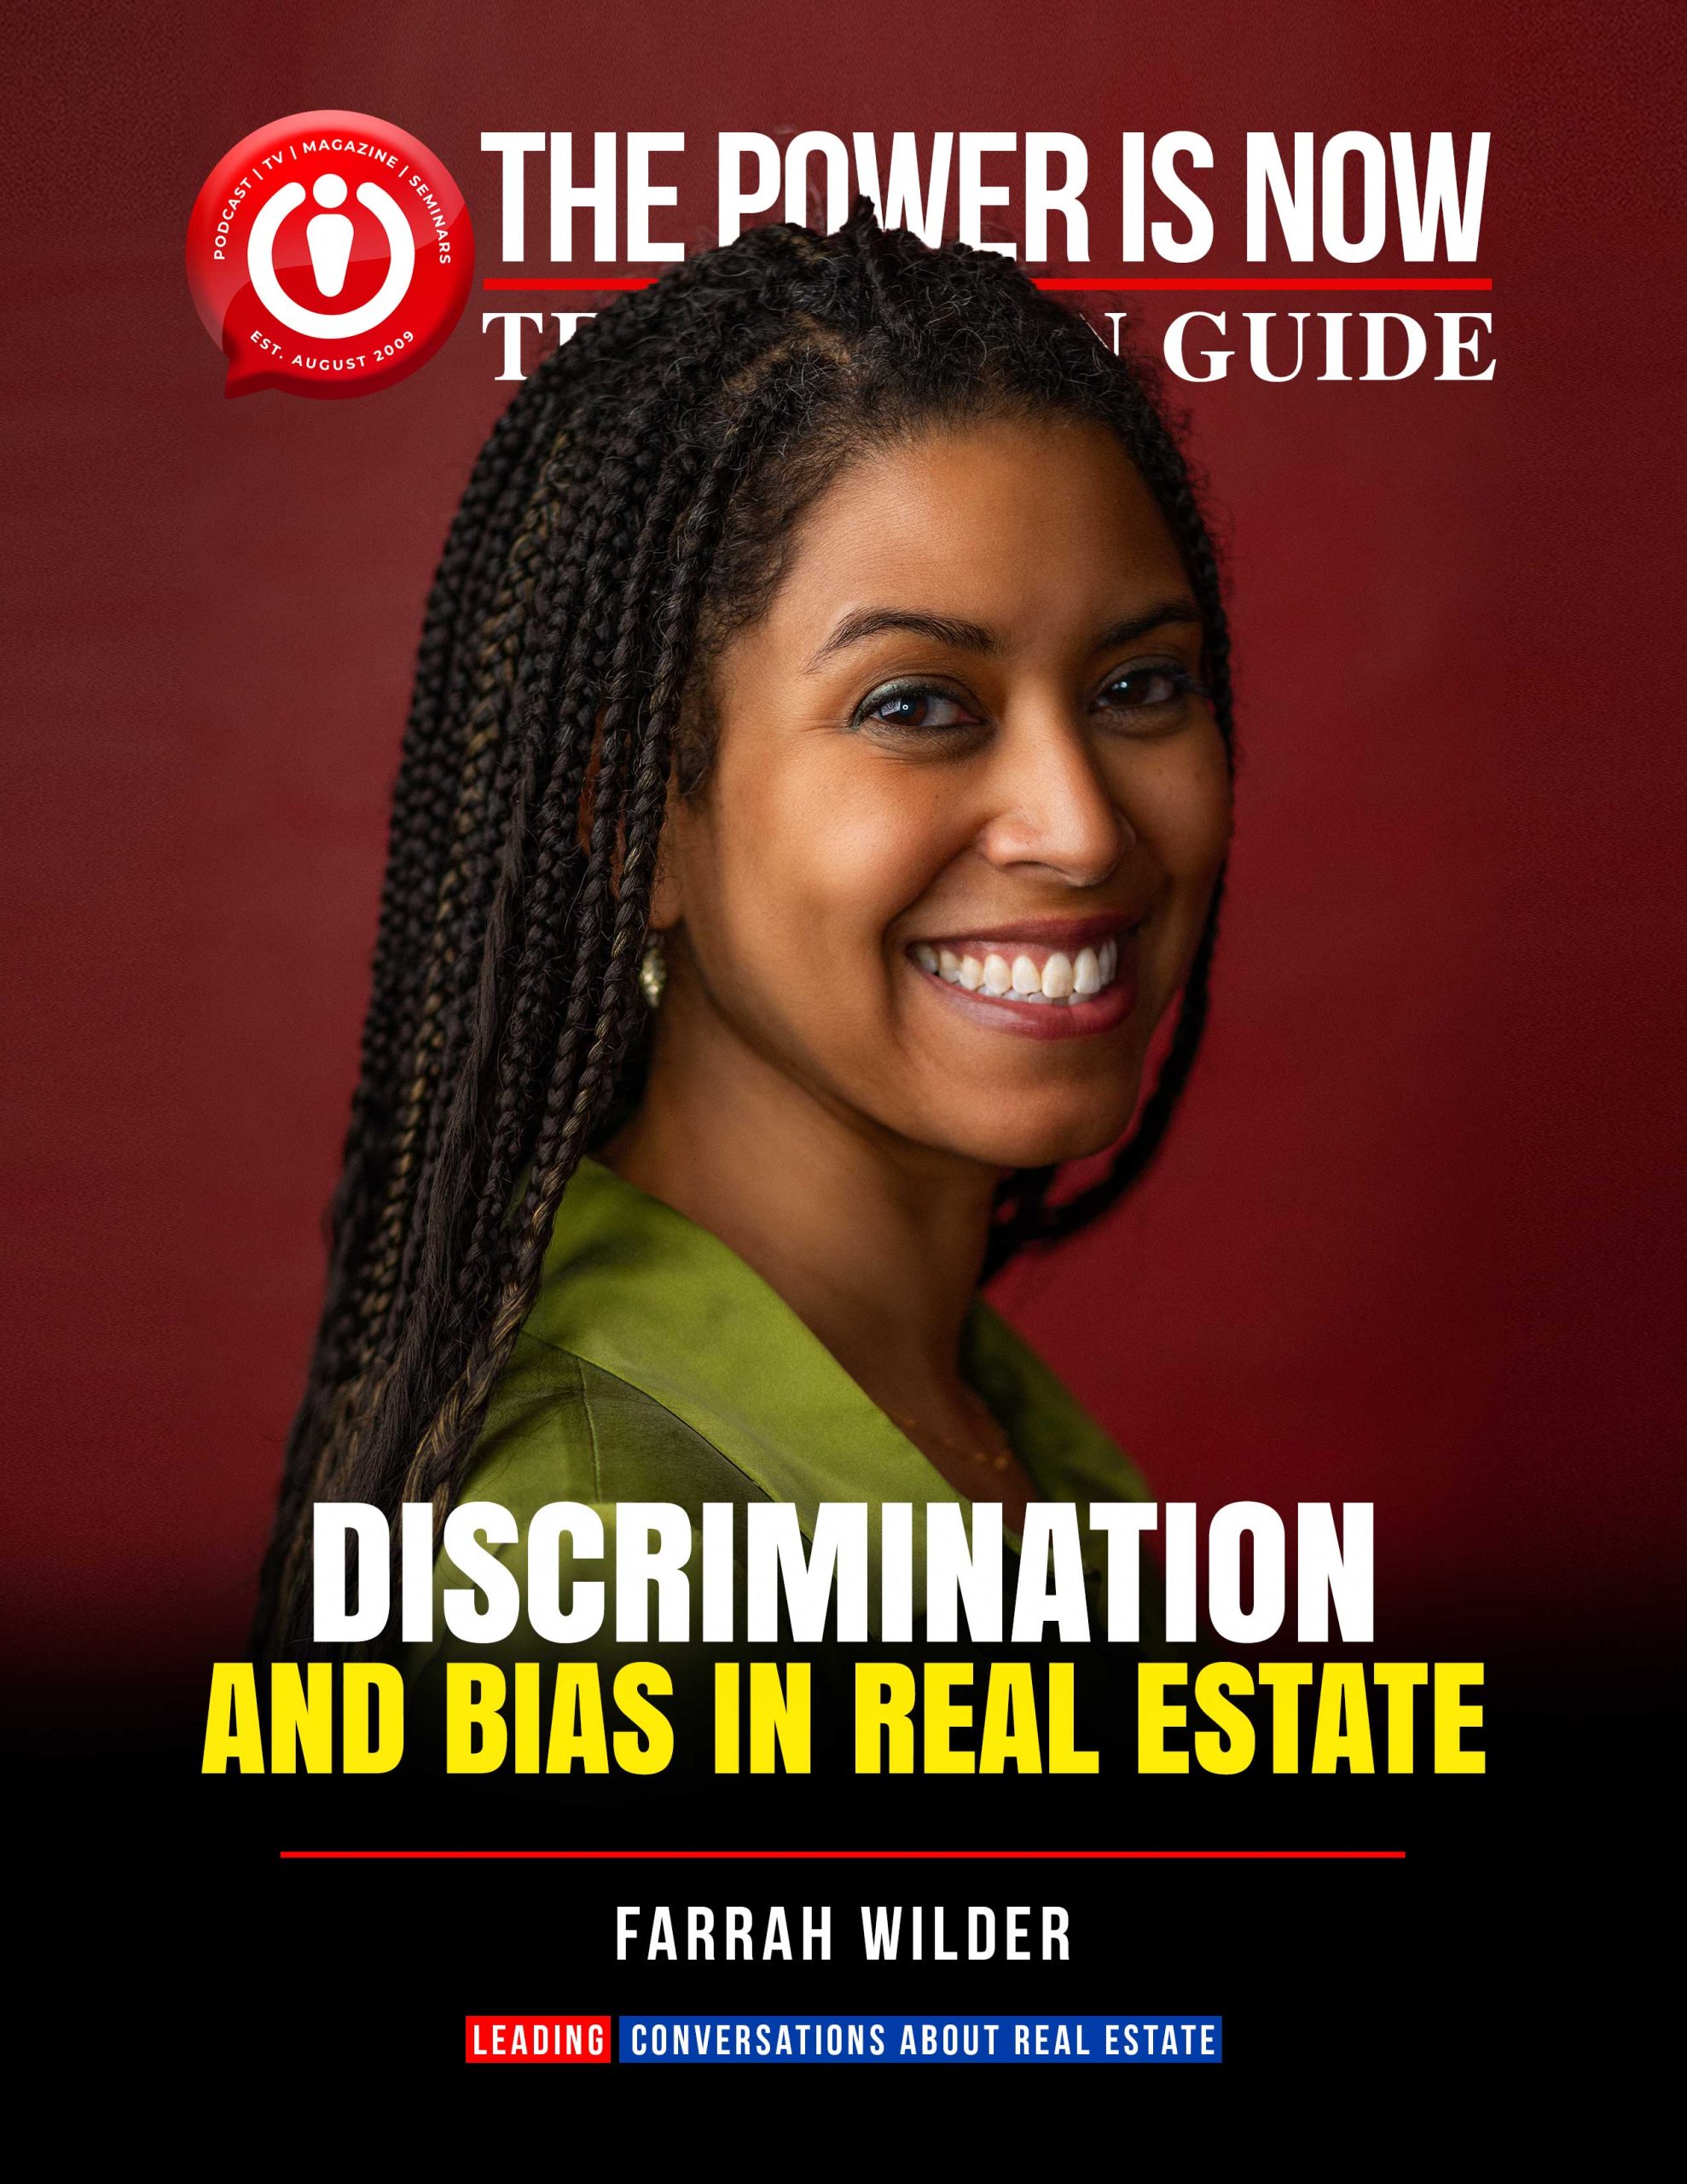 , Farrah Wilder shares her inspirational journey, highlighting the crucial role of family support in achieving homeownership dreams. She also discusses the persistent challenges faced by various communities, addressing discrimination and bias in real estate.